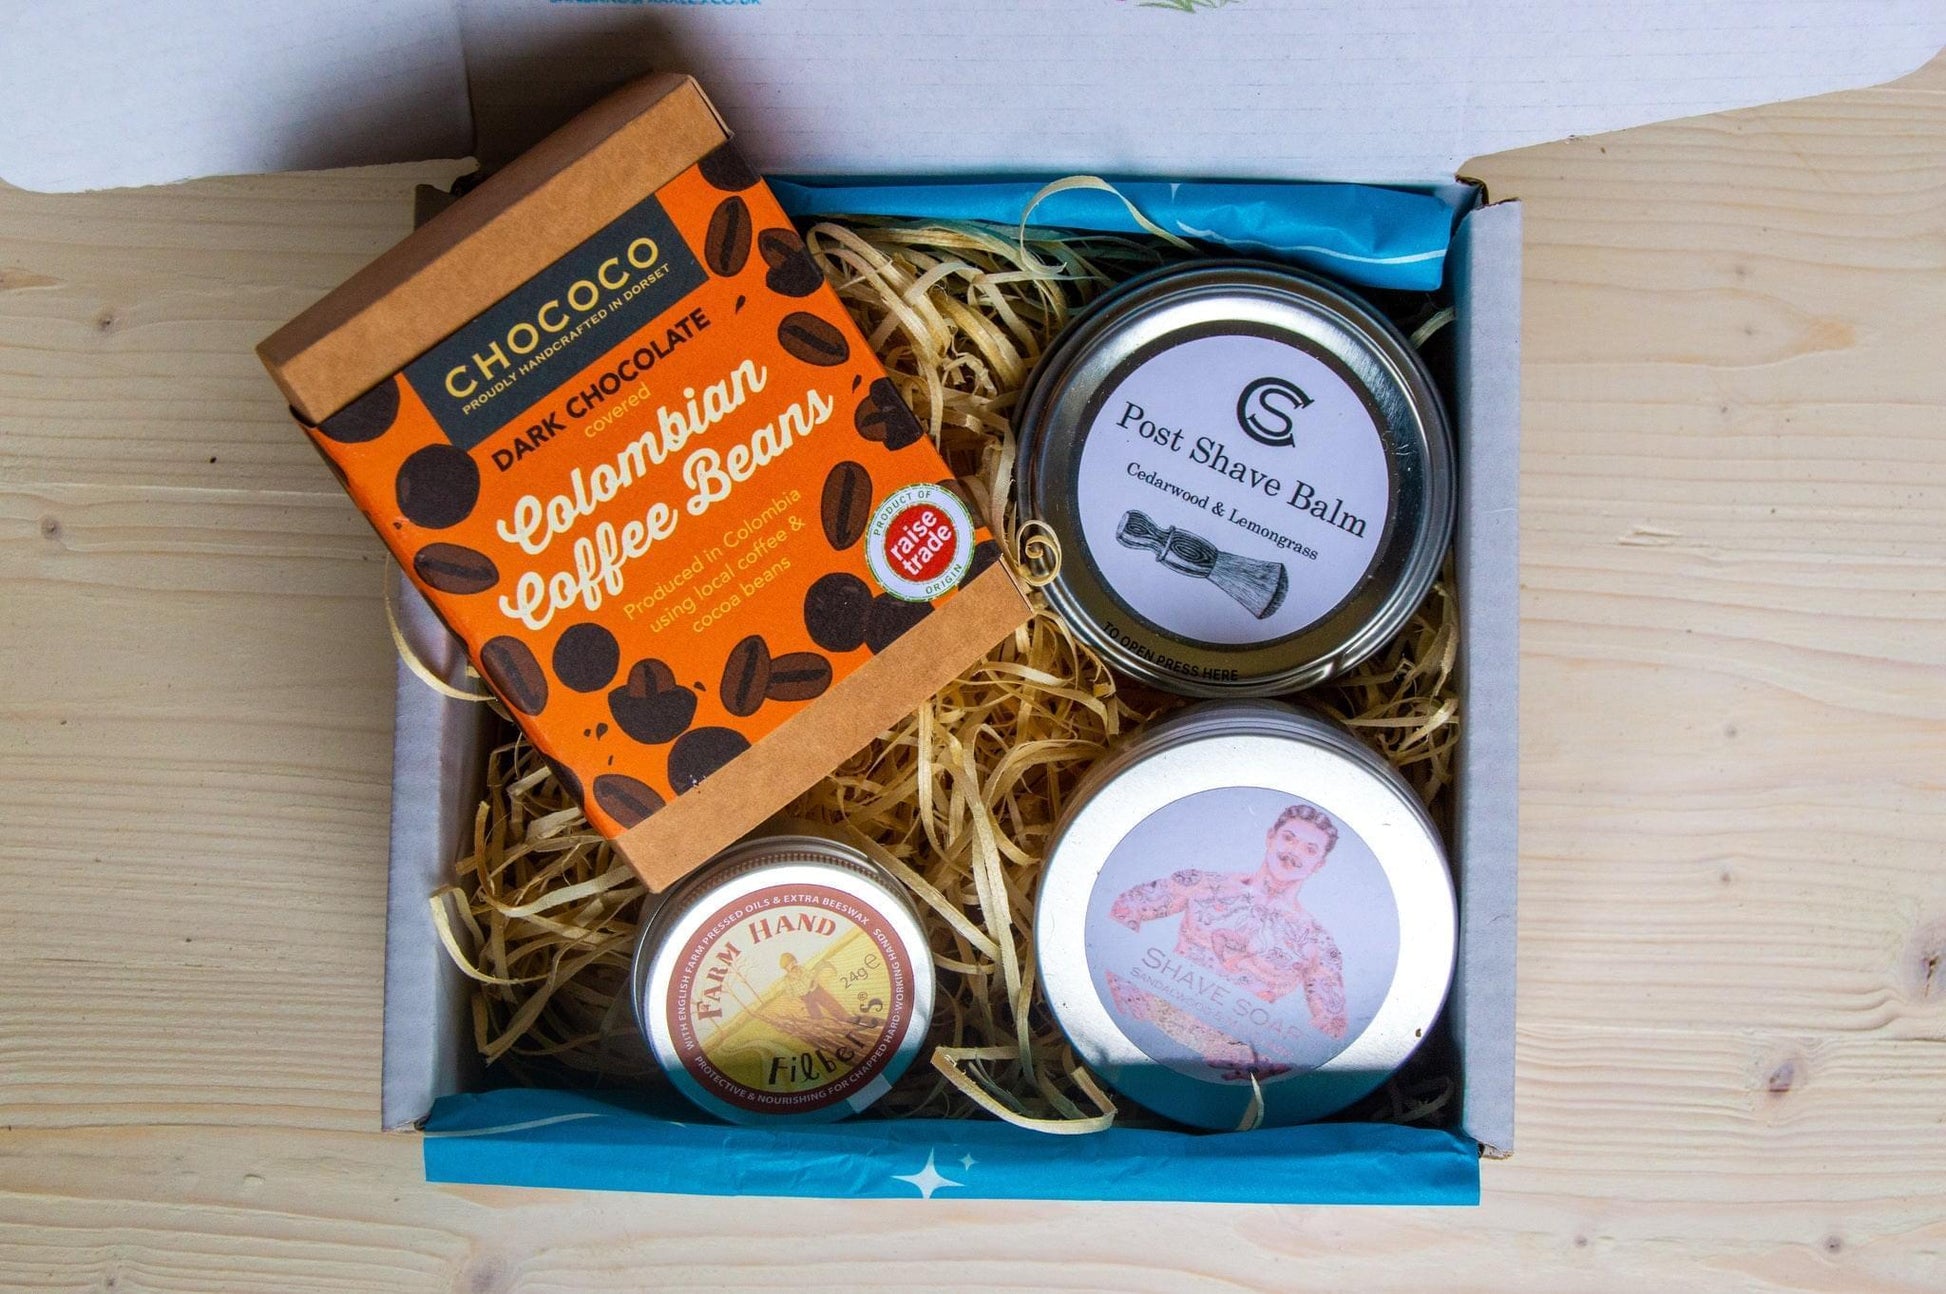 Sand and Sparkles Shave care Gift Box with Devon handmade vegan shave soap and balm, Dorset hand salve and Chococo chocolates